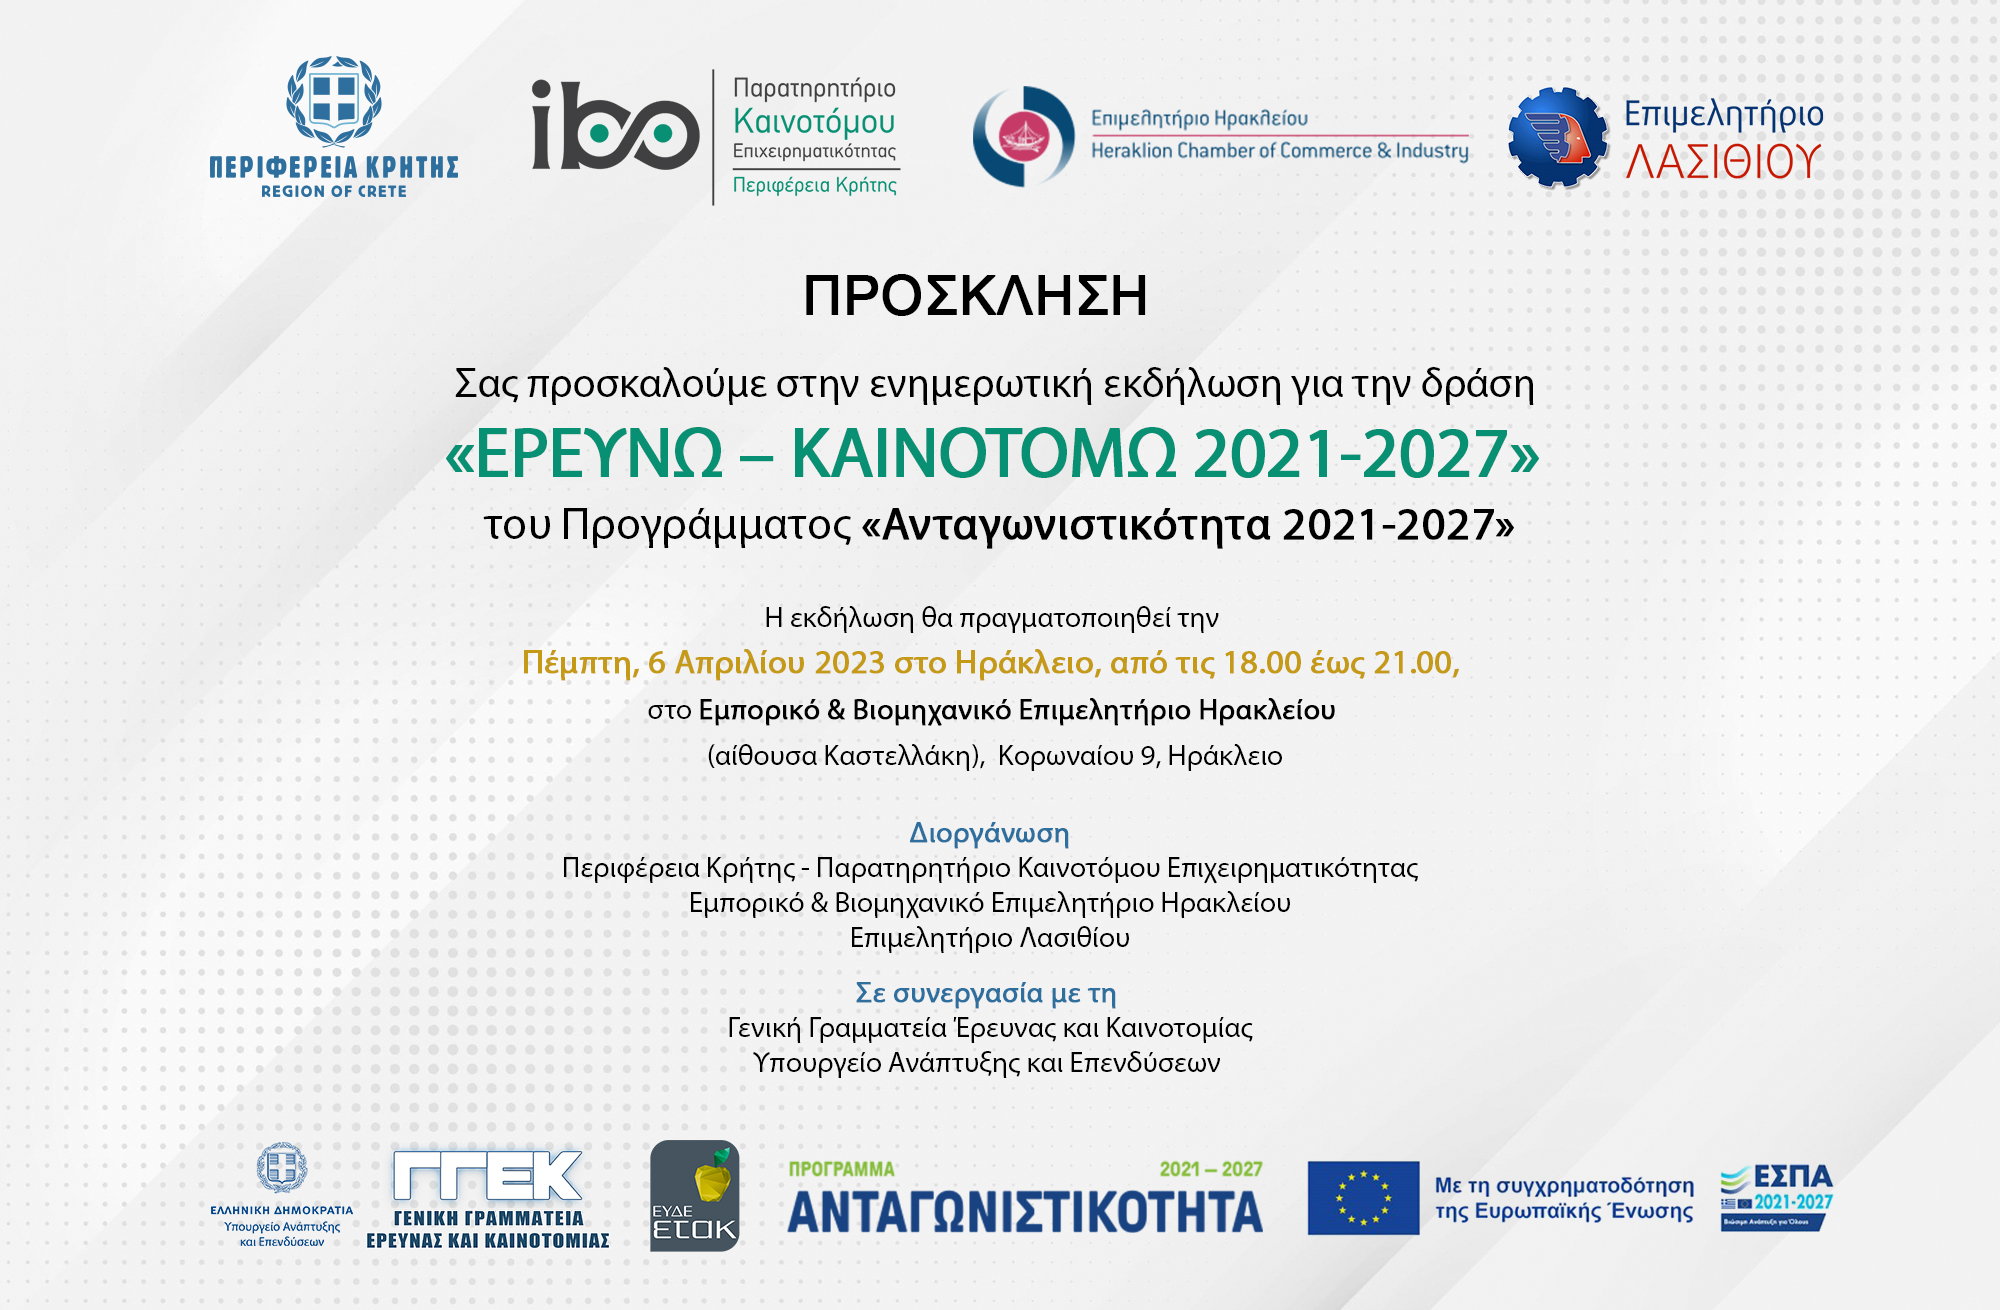 Information event for the action "Research - Innovate 2021-2027" in Heraklion 6/4 Chania7/4 